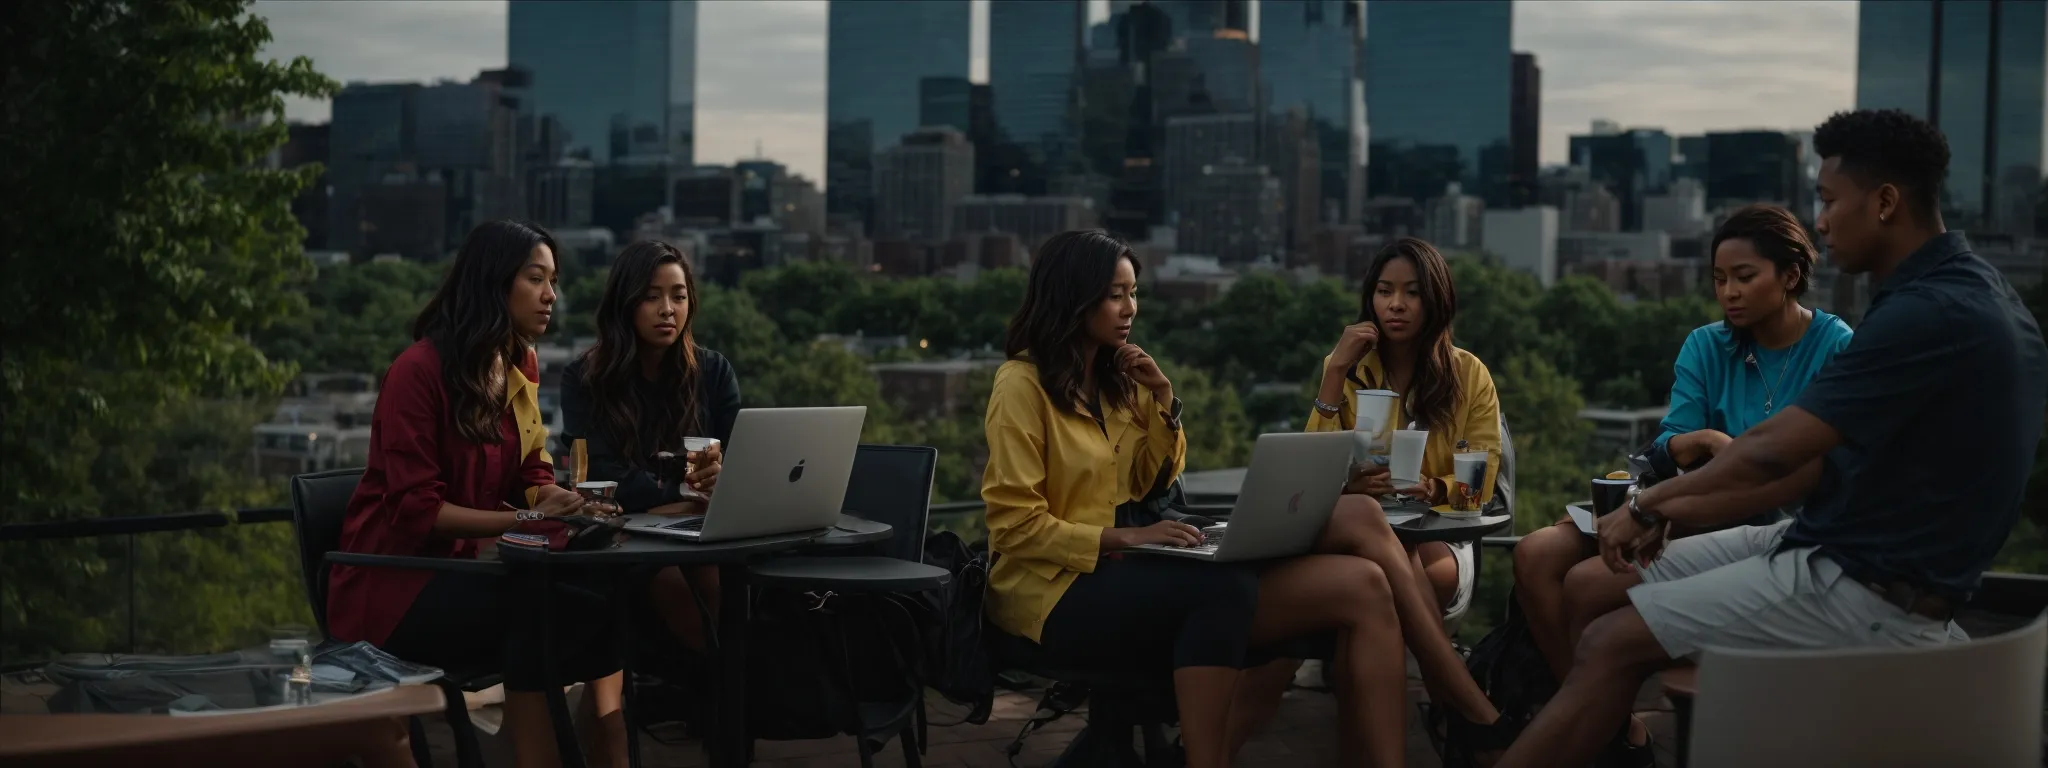 a group of professionals gathered around a laptop, discussing strategies with the iconic ann arbor skyline in the background.